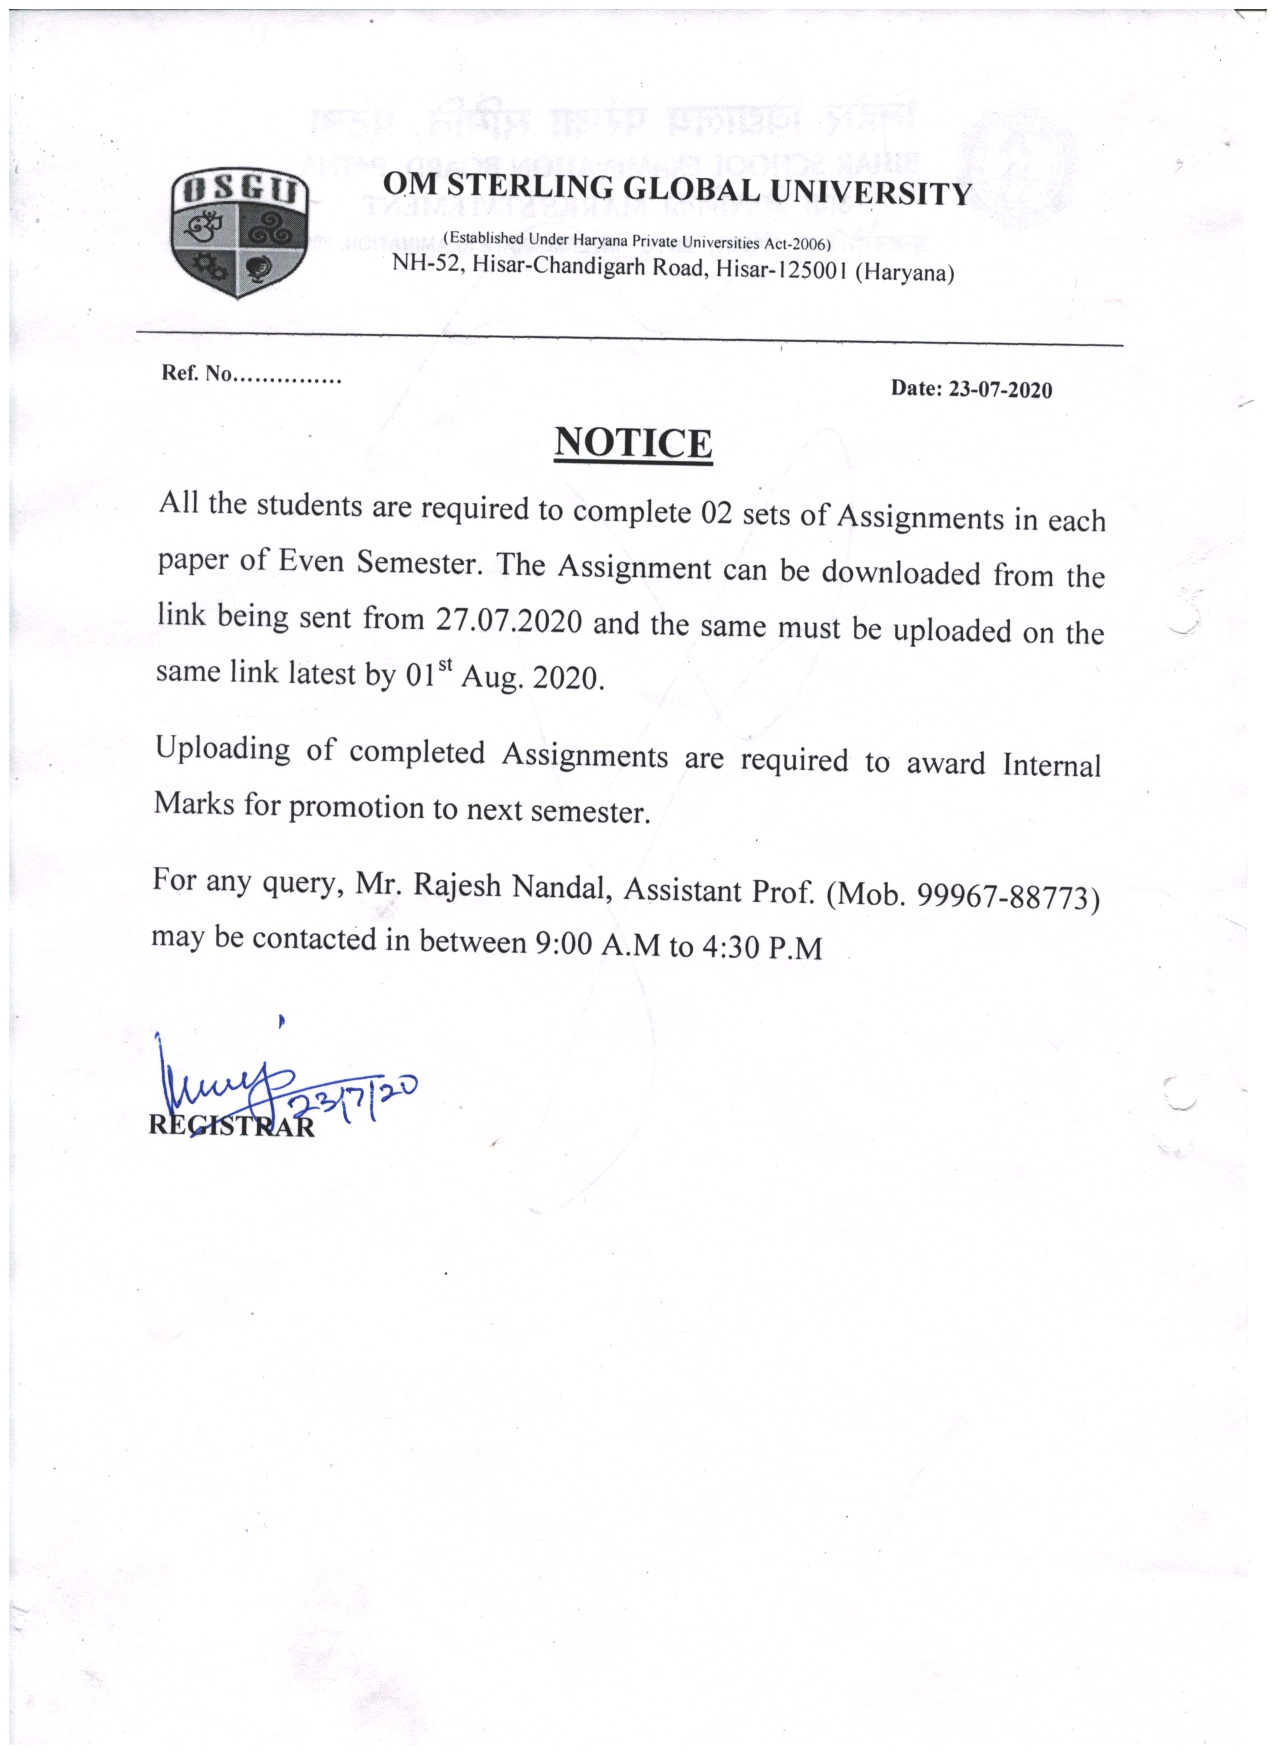 assignment submission notice for students